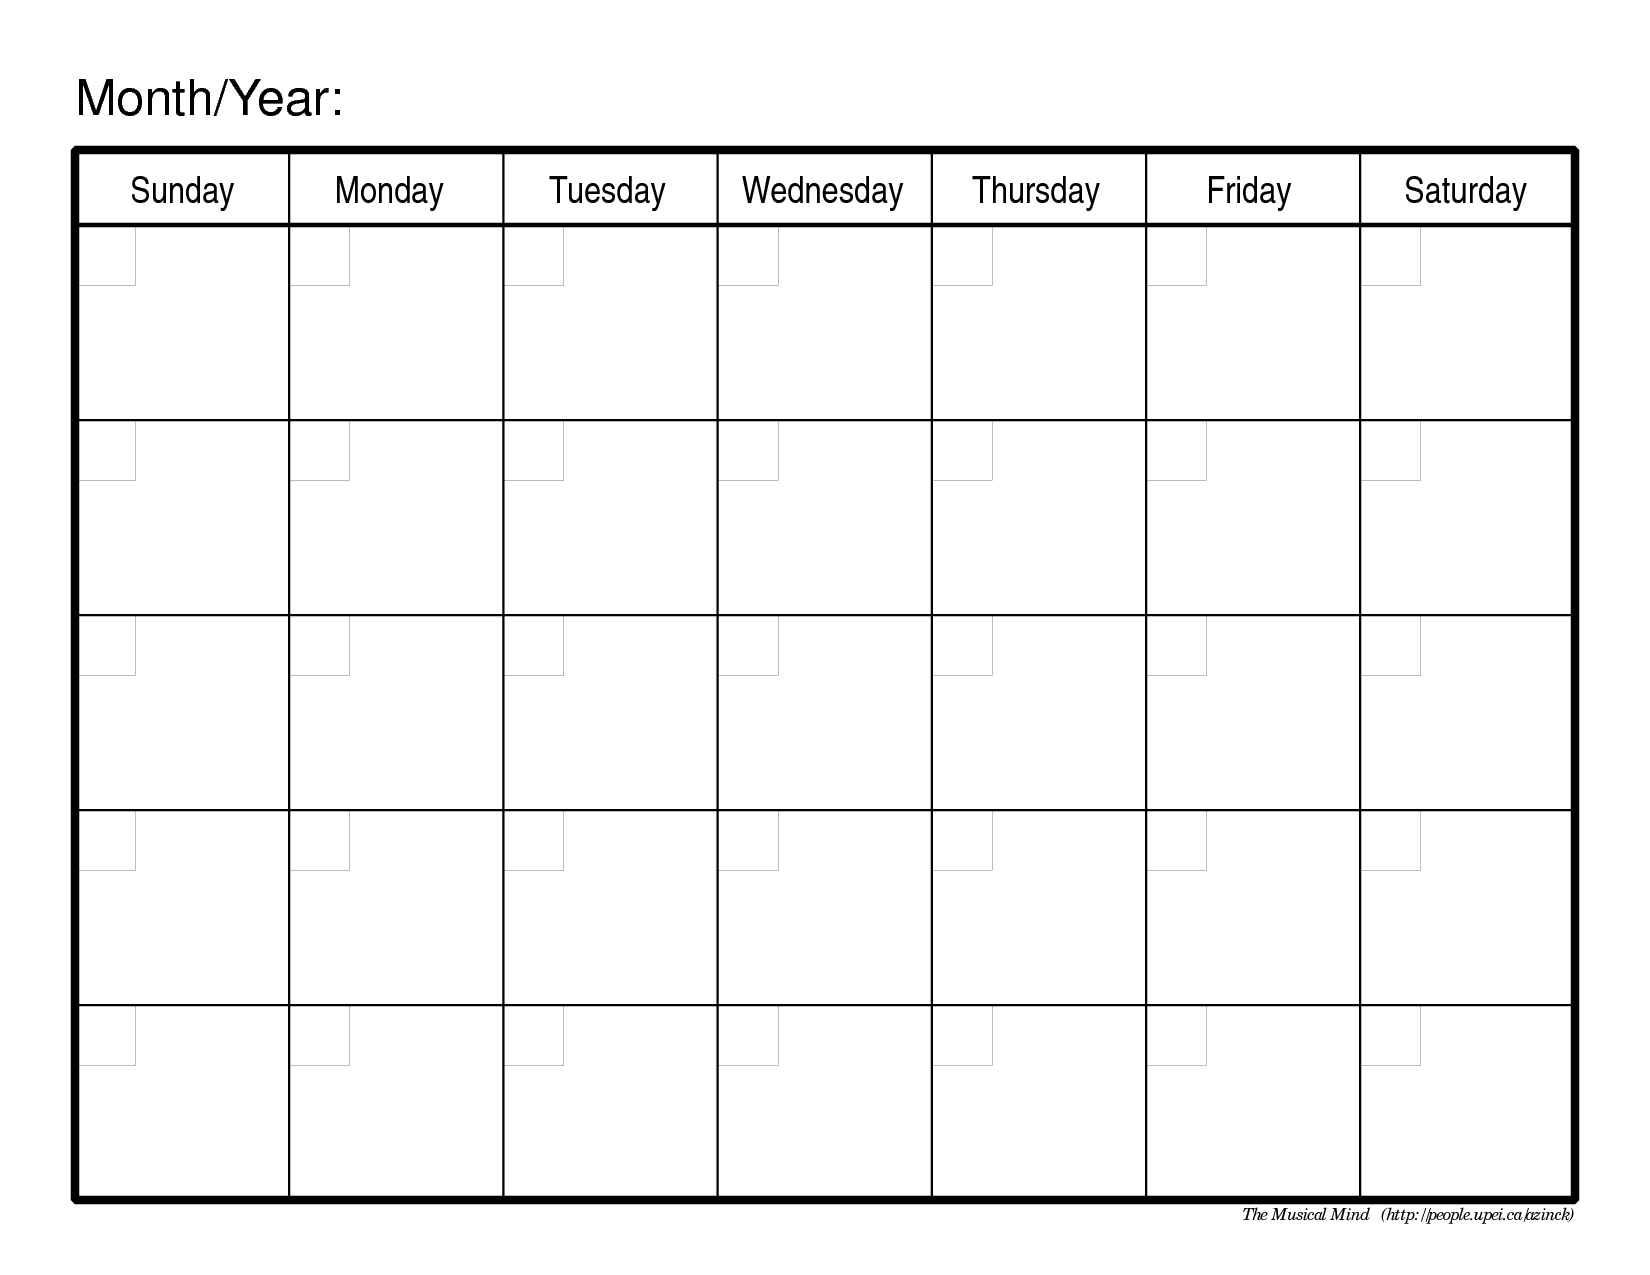 Monthly Calendar Template 02 | Printable Calendar Pages With Blank Calander Template